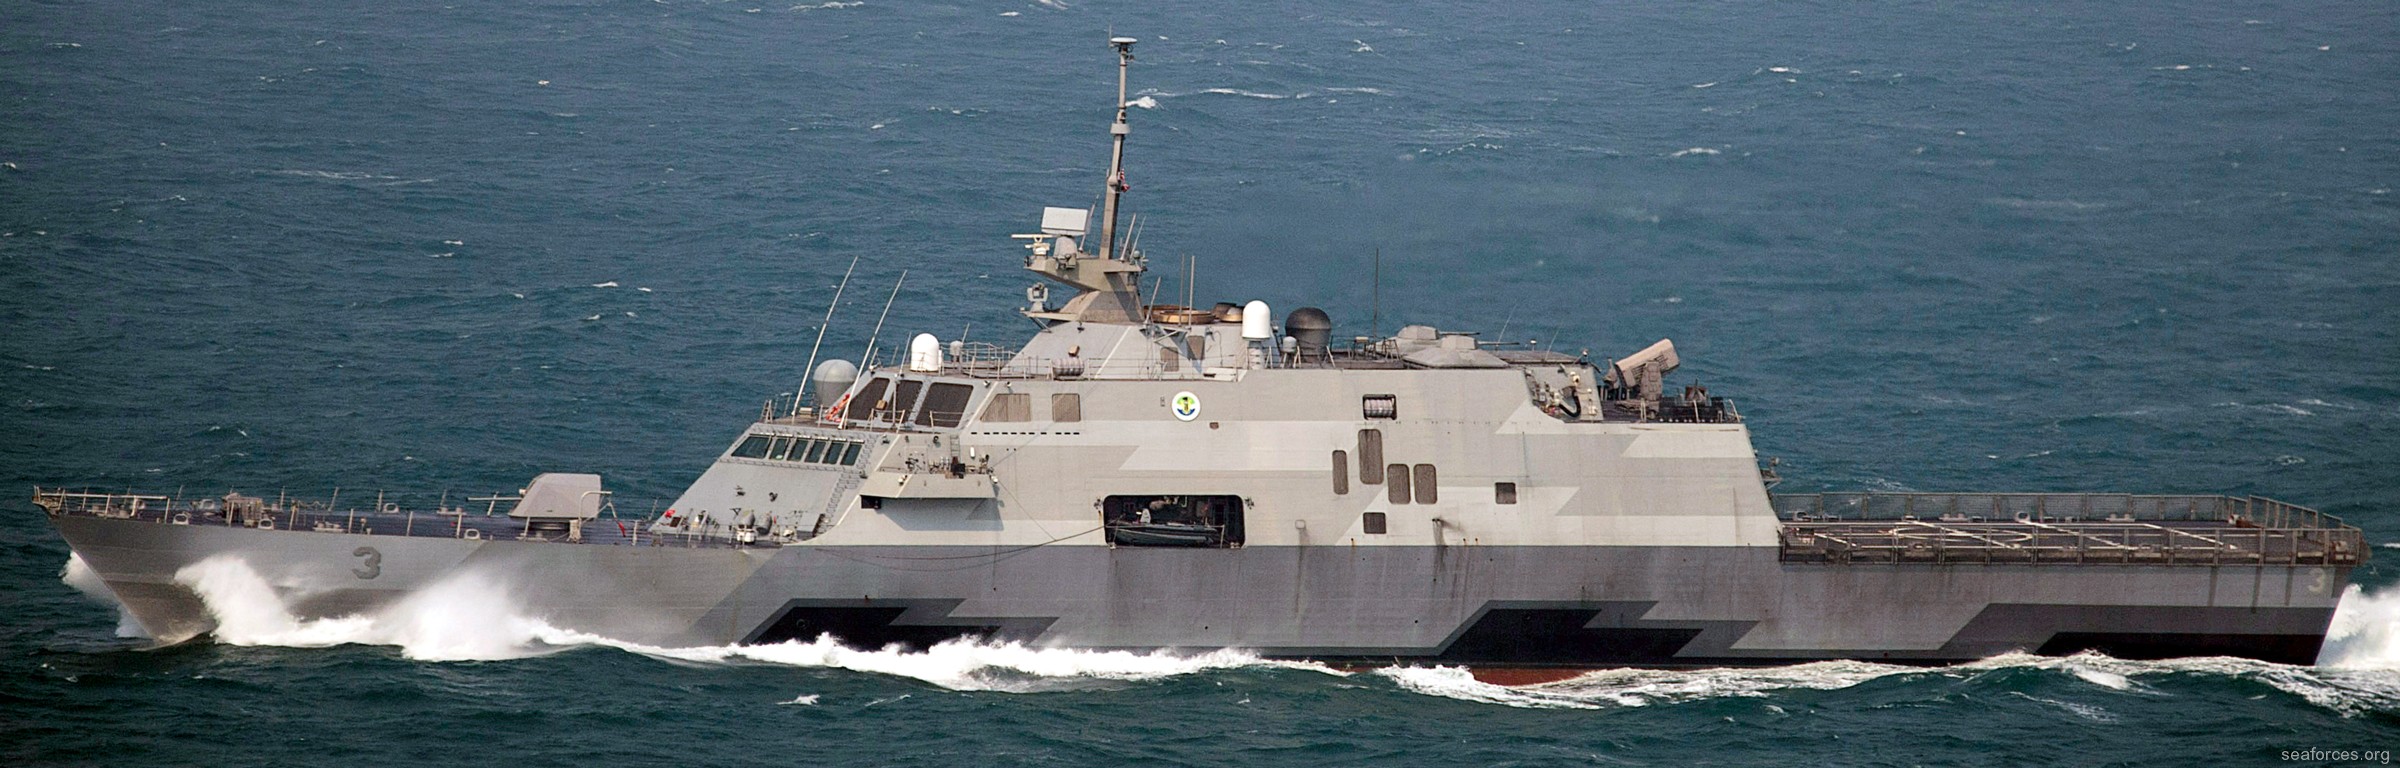 lcs-3 uss fort worth littoral combat ship freedom class us navy 11 exercise foal eagle